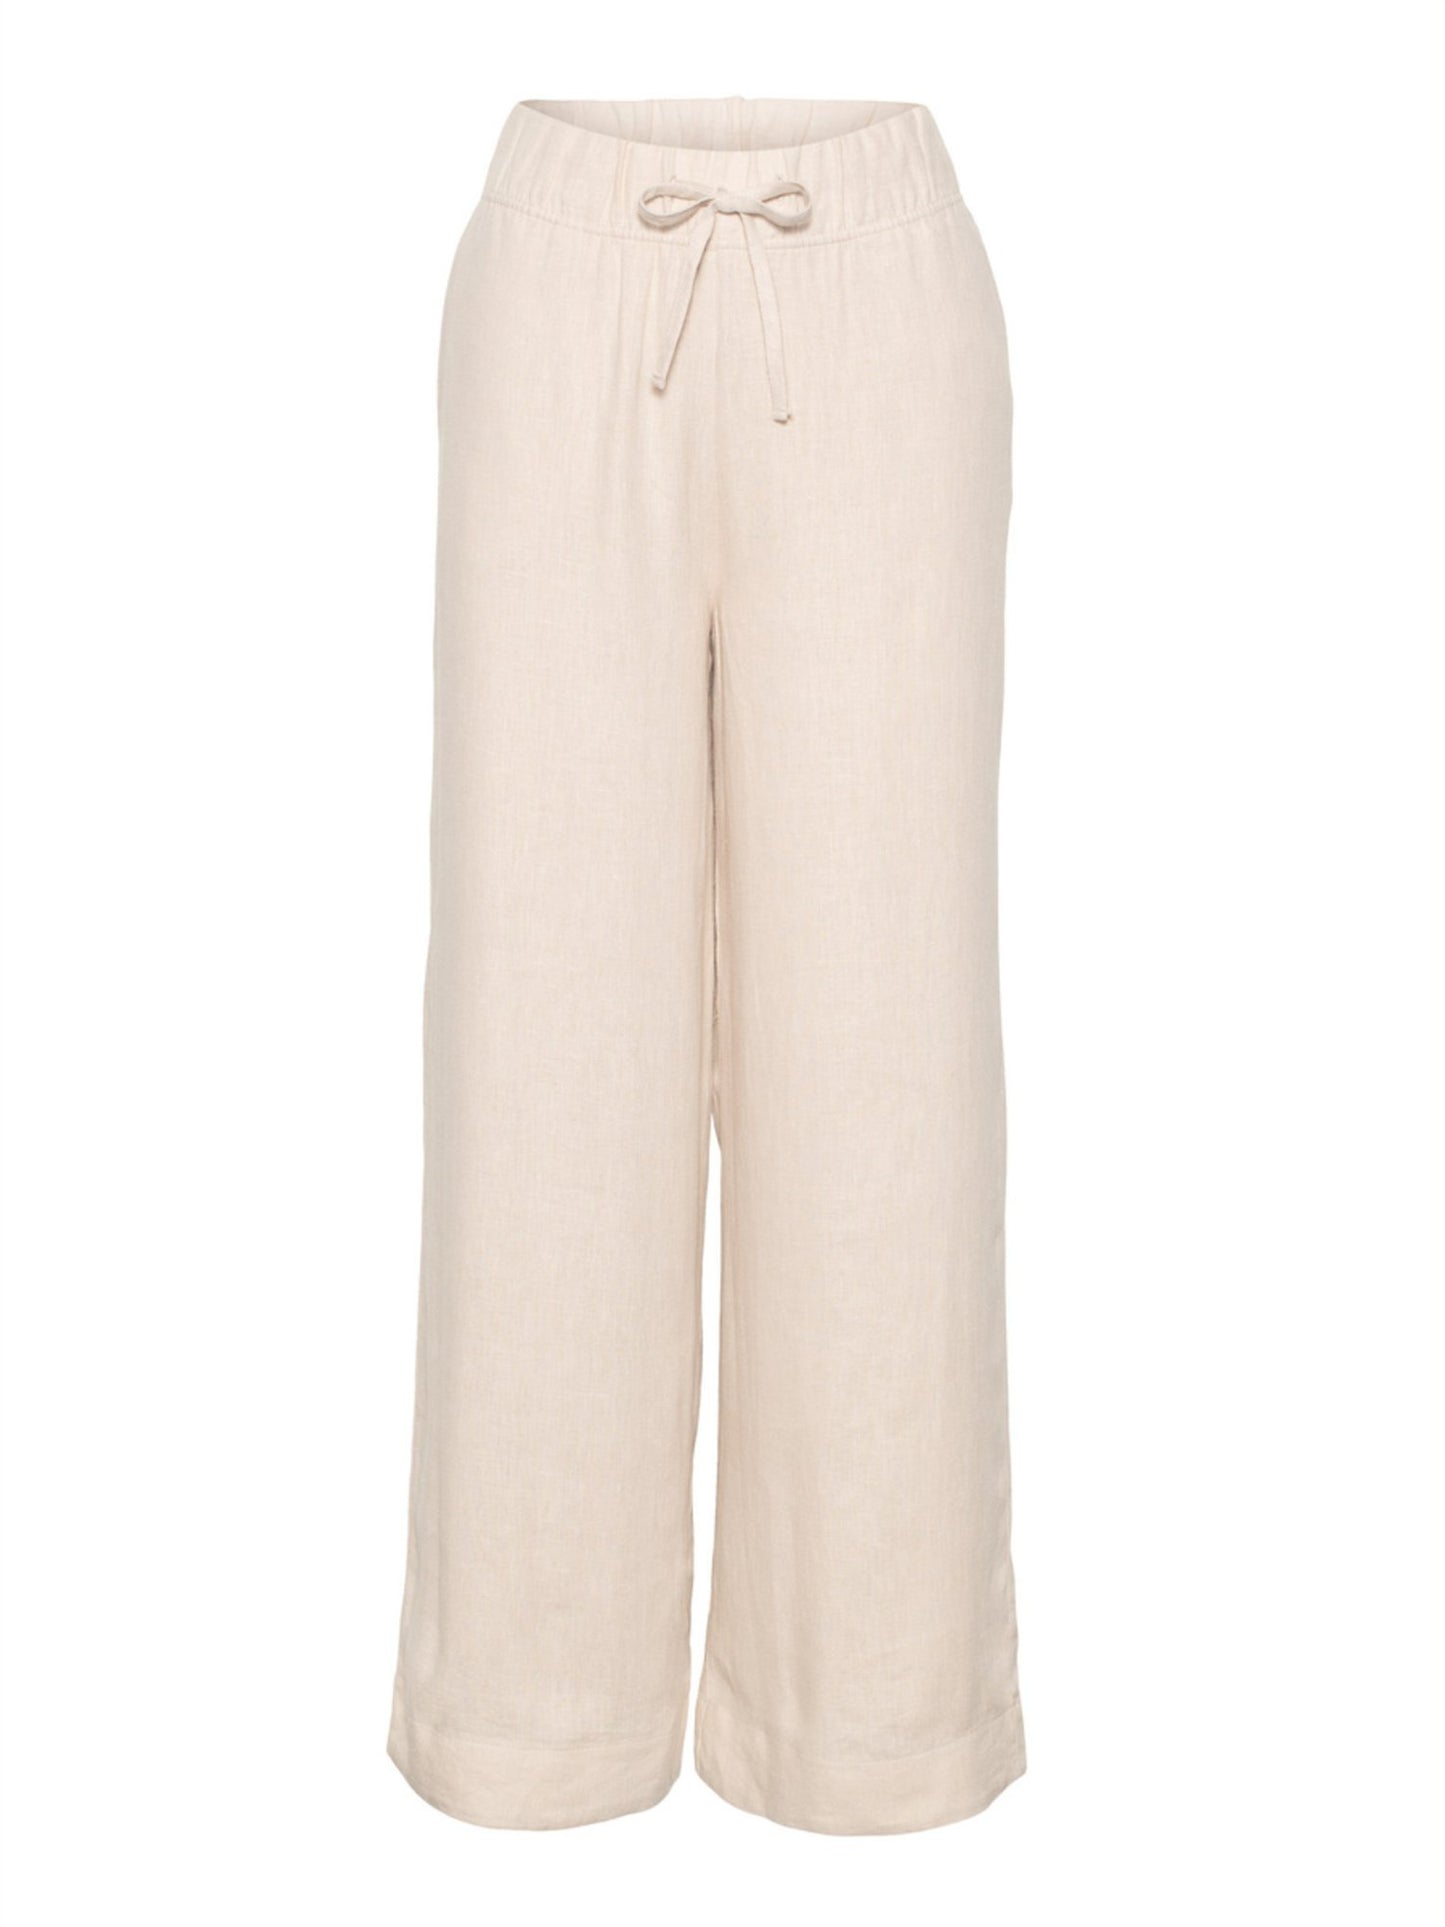 Immi Linen Pants - Beige - at home